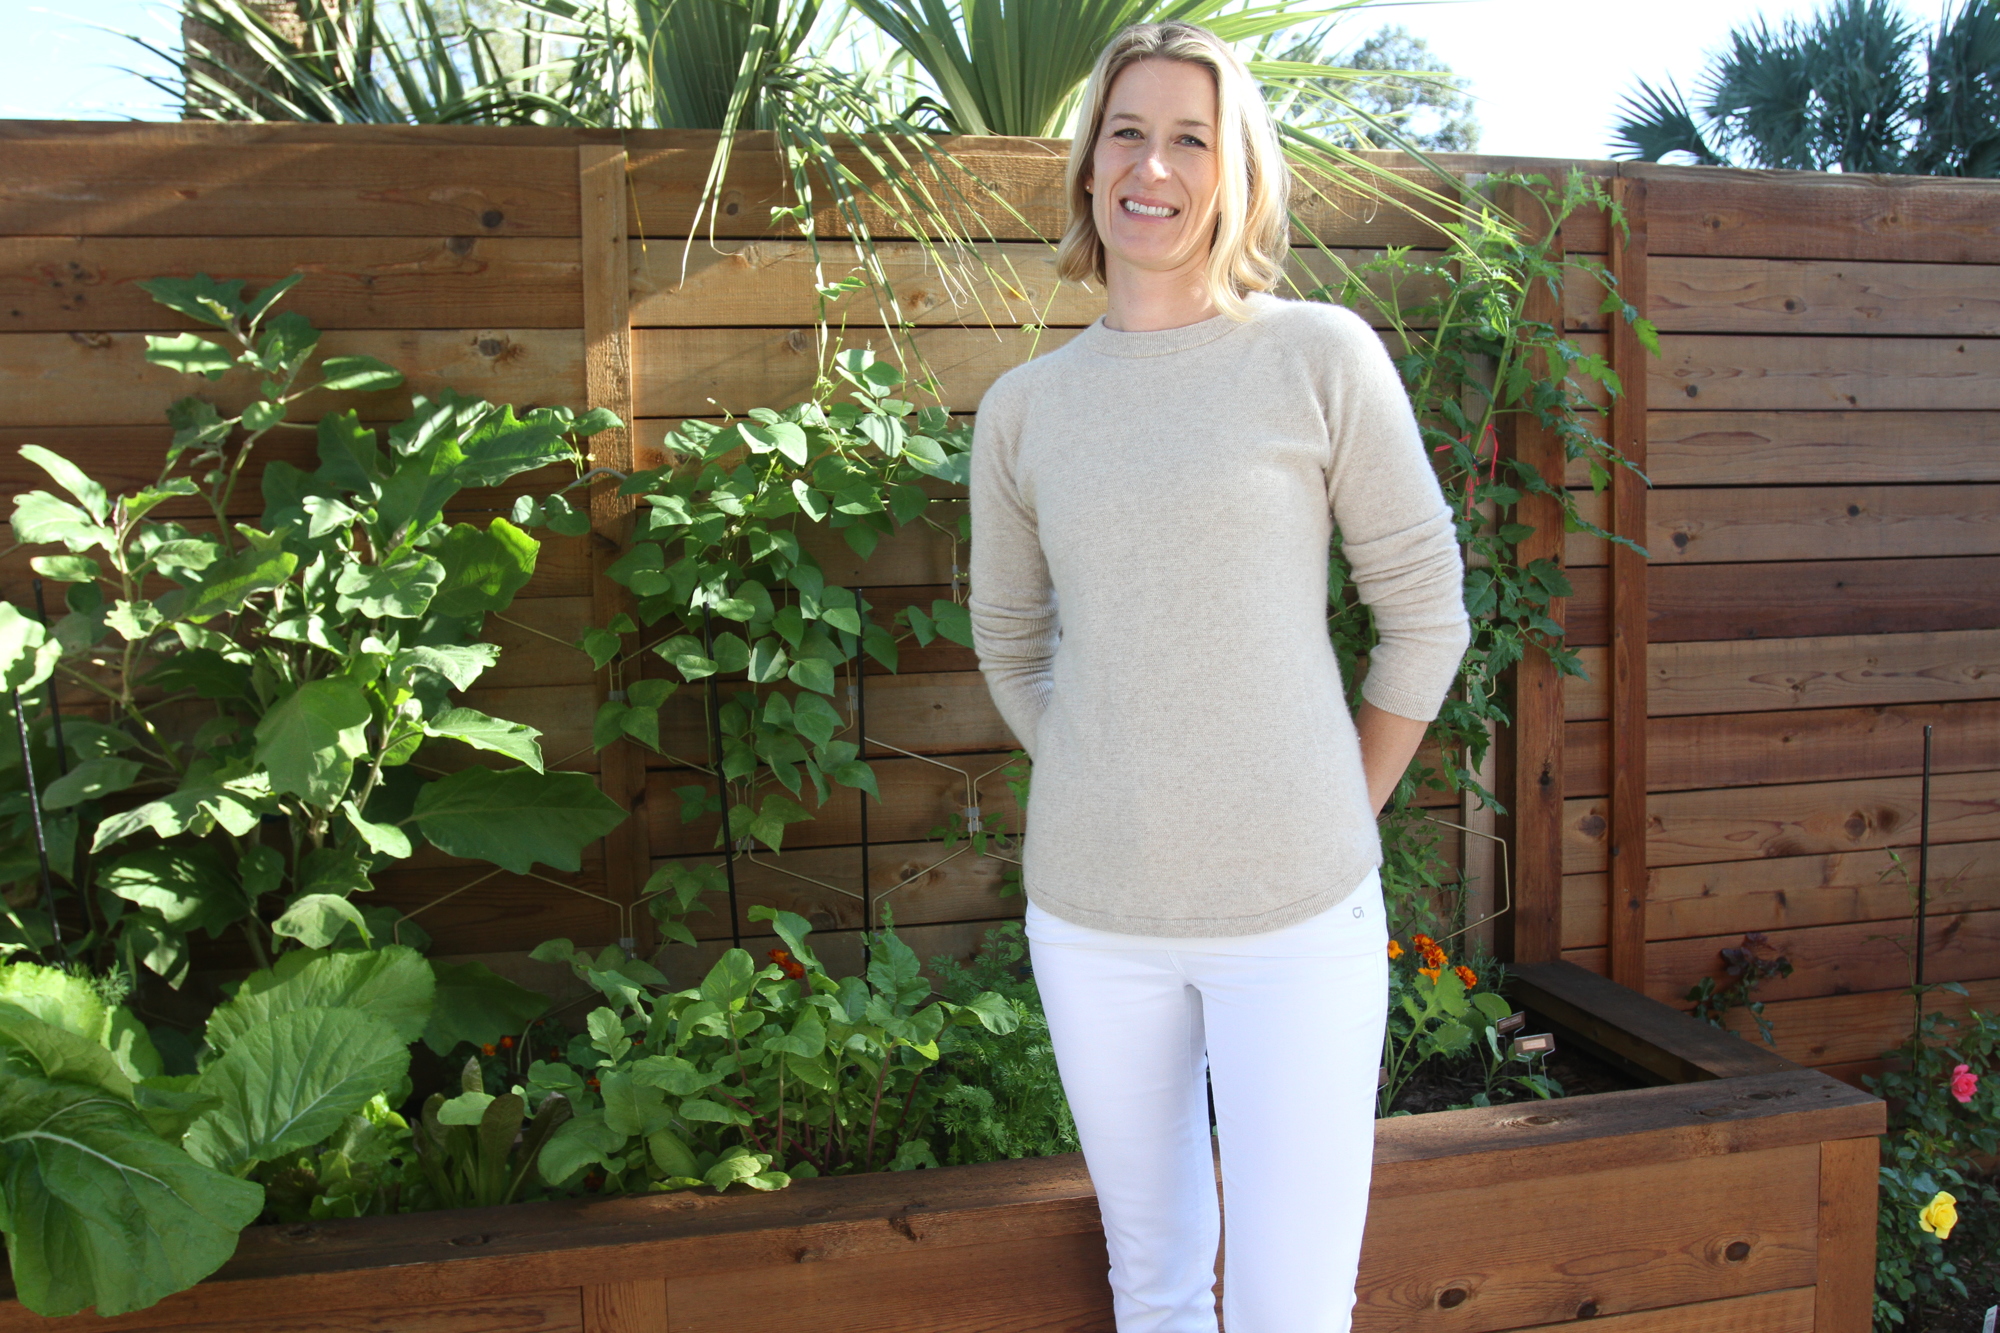 Maike Foster has found peace working on her edible garden for much of 2020.